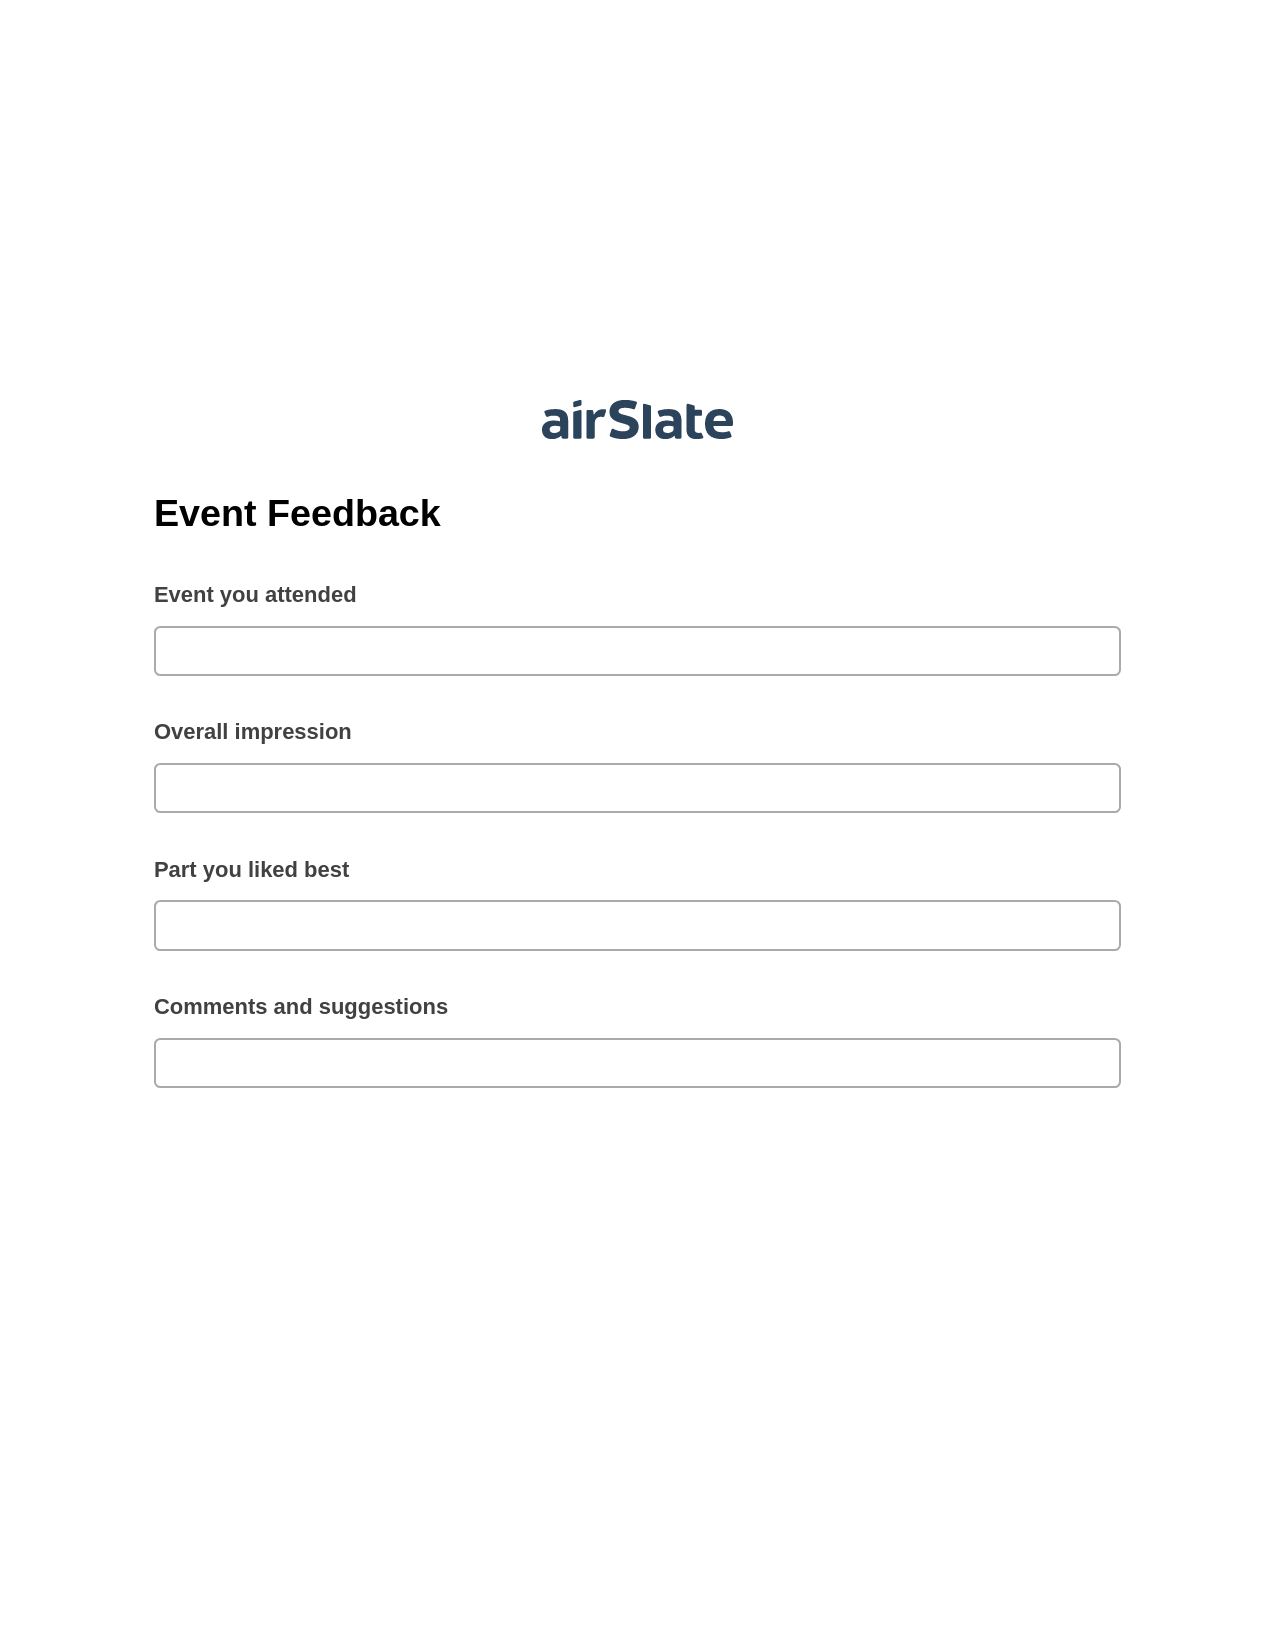 Multirole Event Feedback Pre-fill Slate from MS Dynamics 365 Records Bot, Update Salesforce Record Bot, Export to Excel 365 Bot